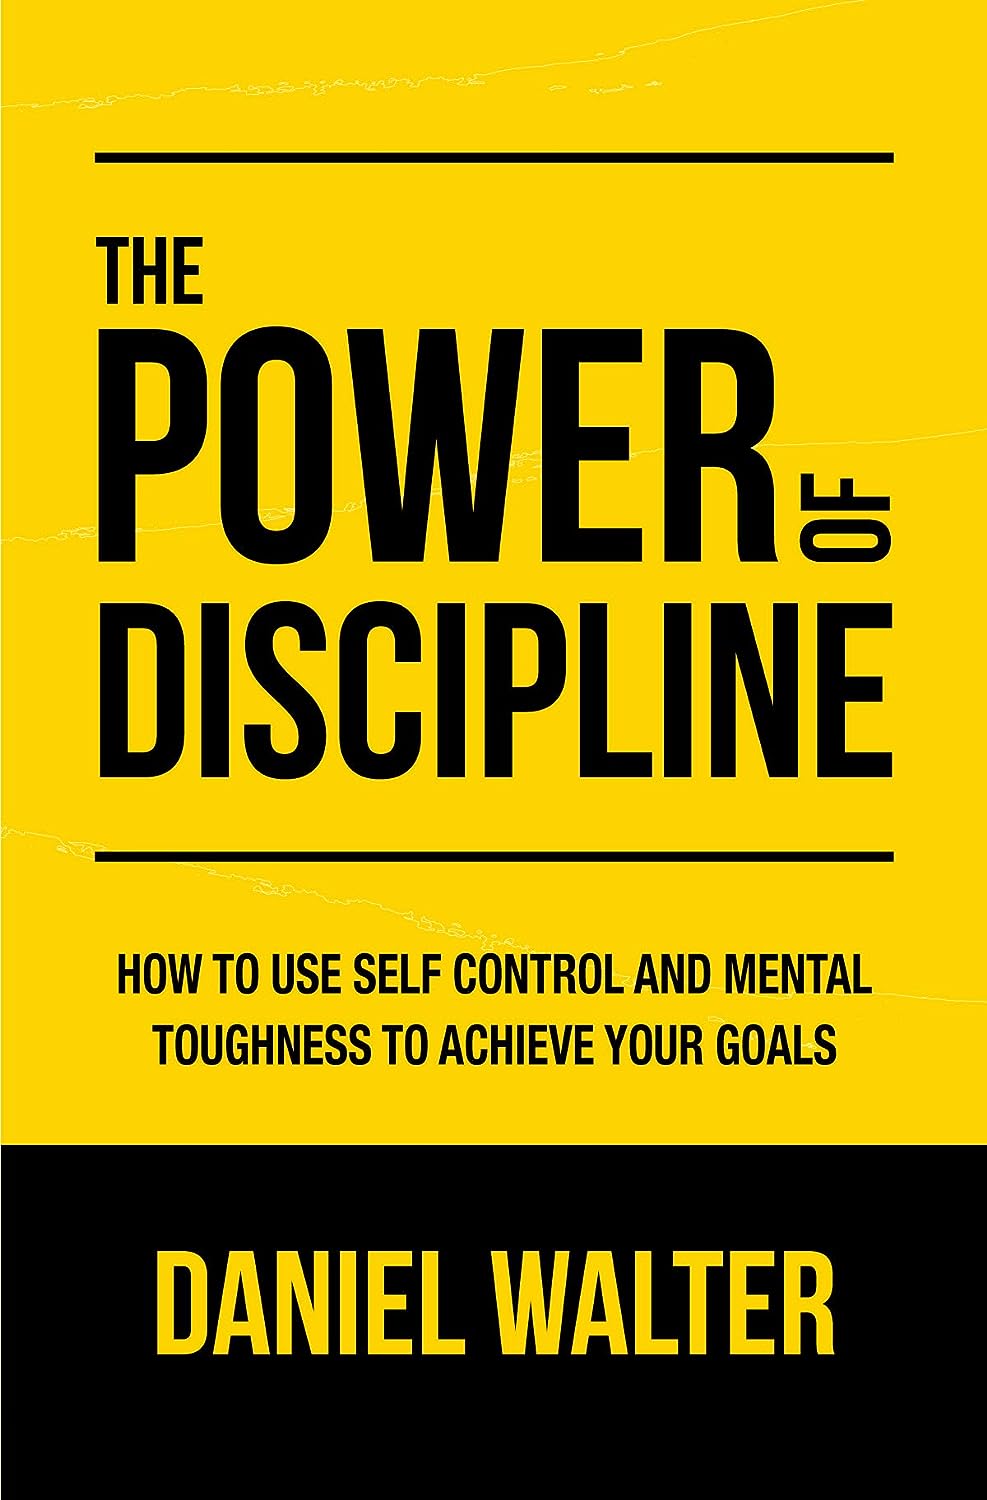 The Power of Discipline: How to Use Self Control and Mental Toughness to Achieve Your Goals Kindle Edition